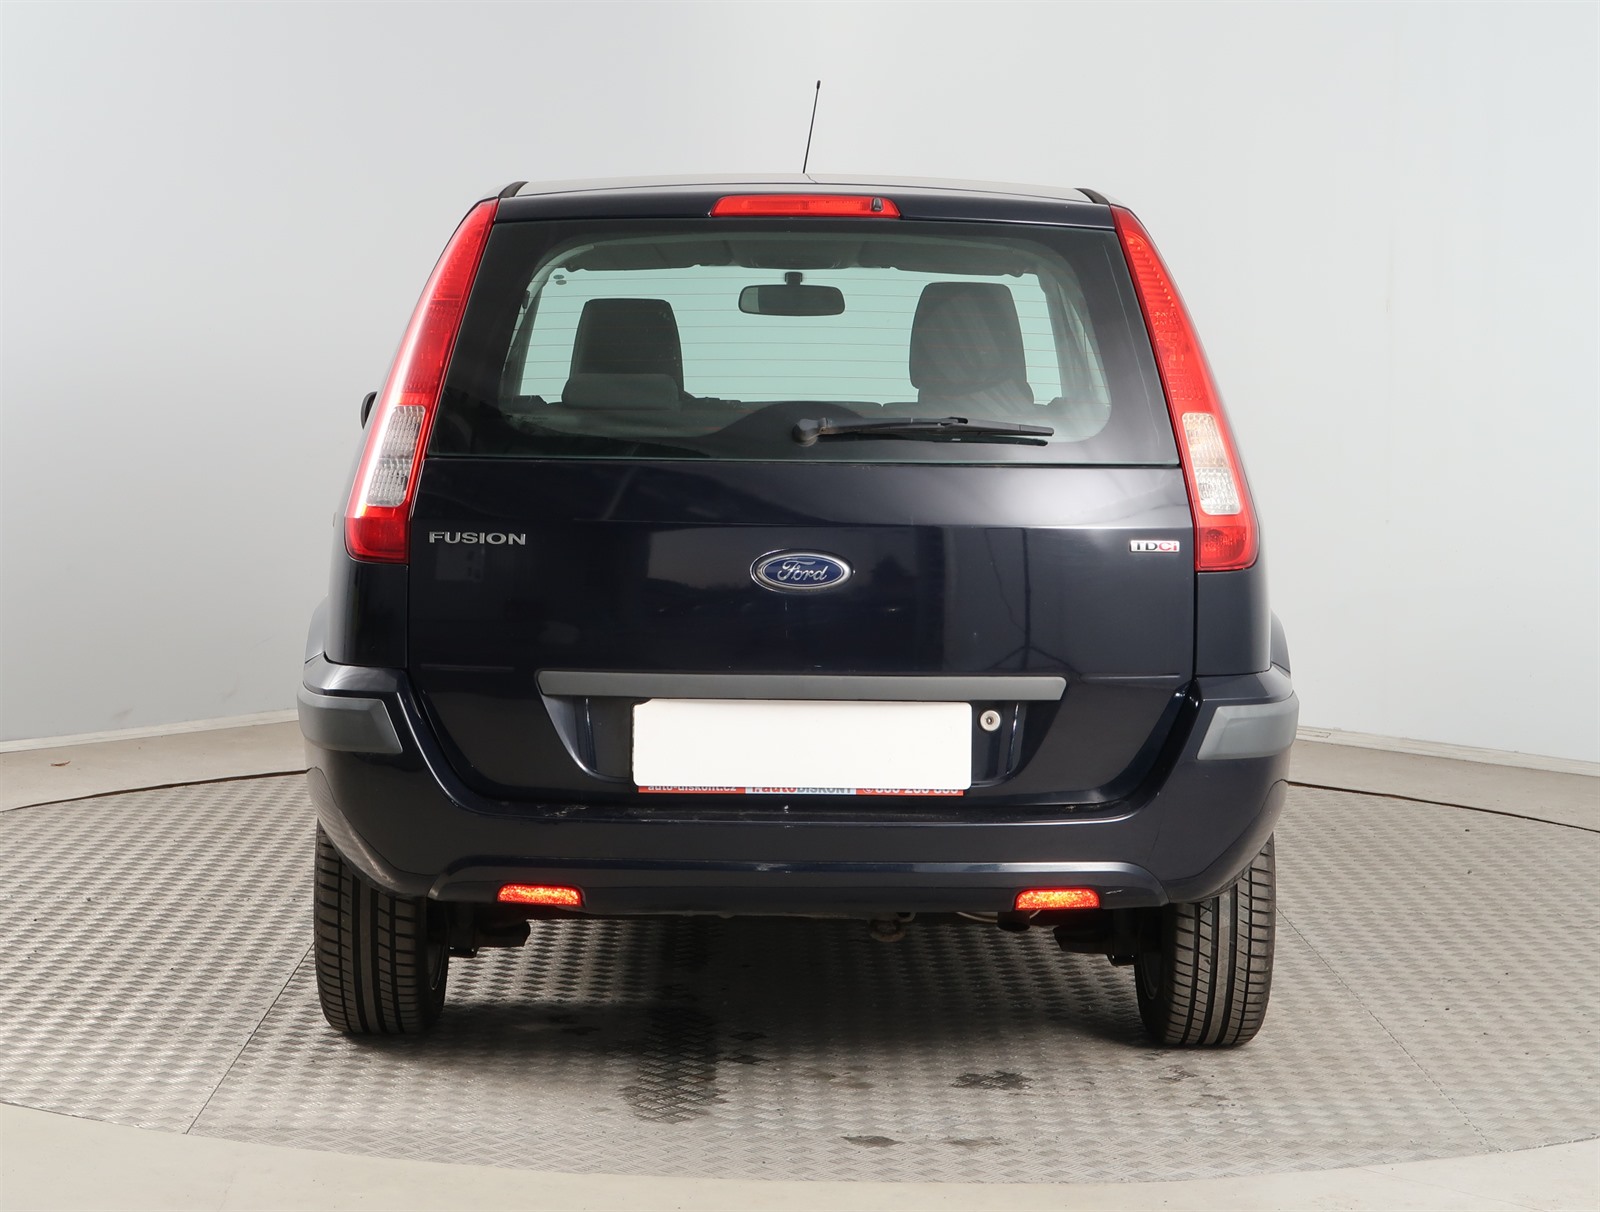 Ford Fusion, 2006 - pohled č. 6